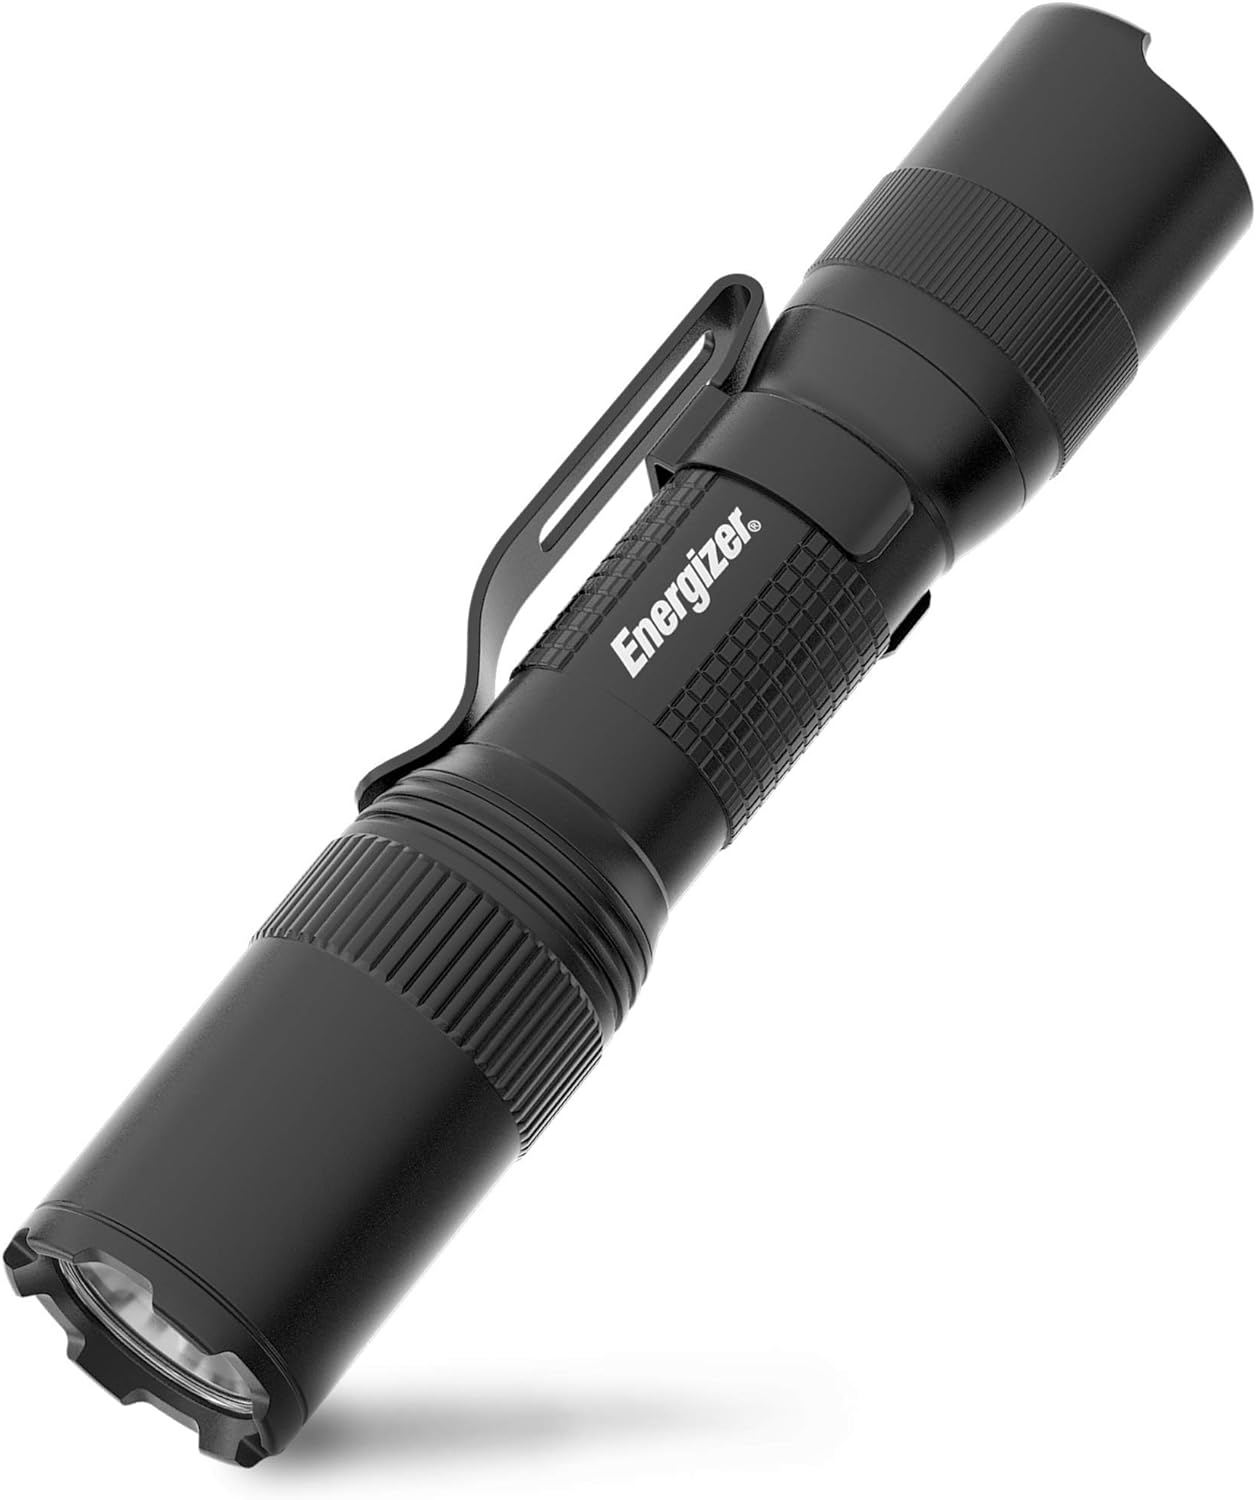 Energizer LED Tactical Flashlights, Rugged Metal Body, IPX4 Water Resistant Flash Lights, High Lumens, Built for Camping, Outdoors, Emerg